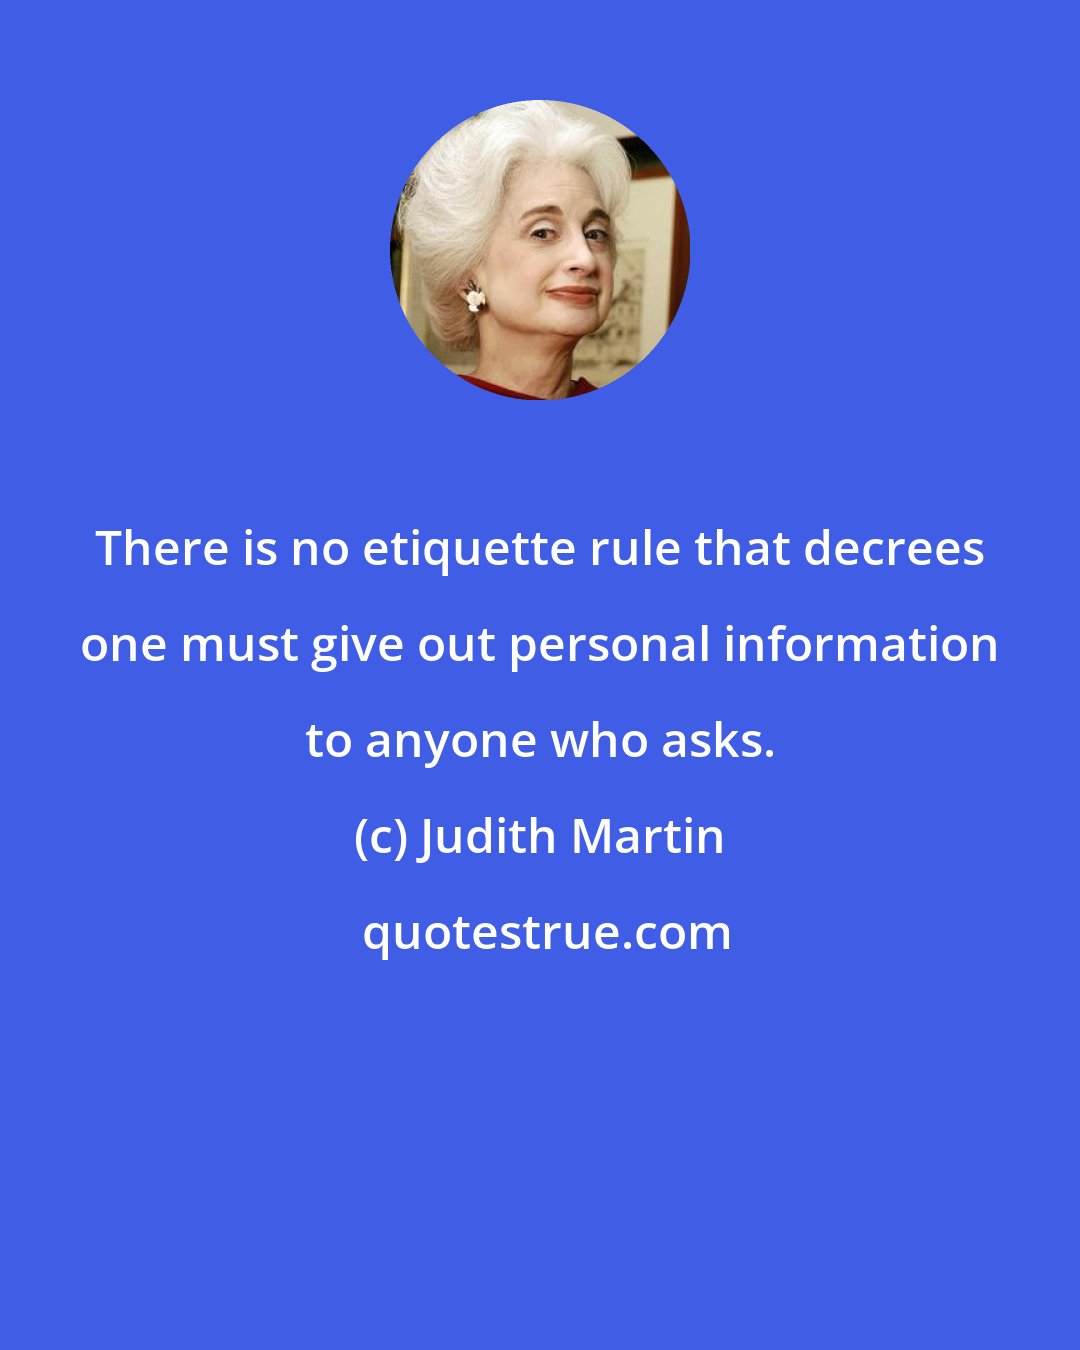 Judith Martin: There is no etiquette rule that decrees one must give out personal information to anyone who asks.